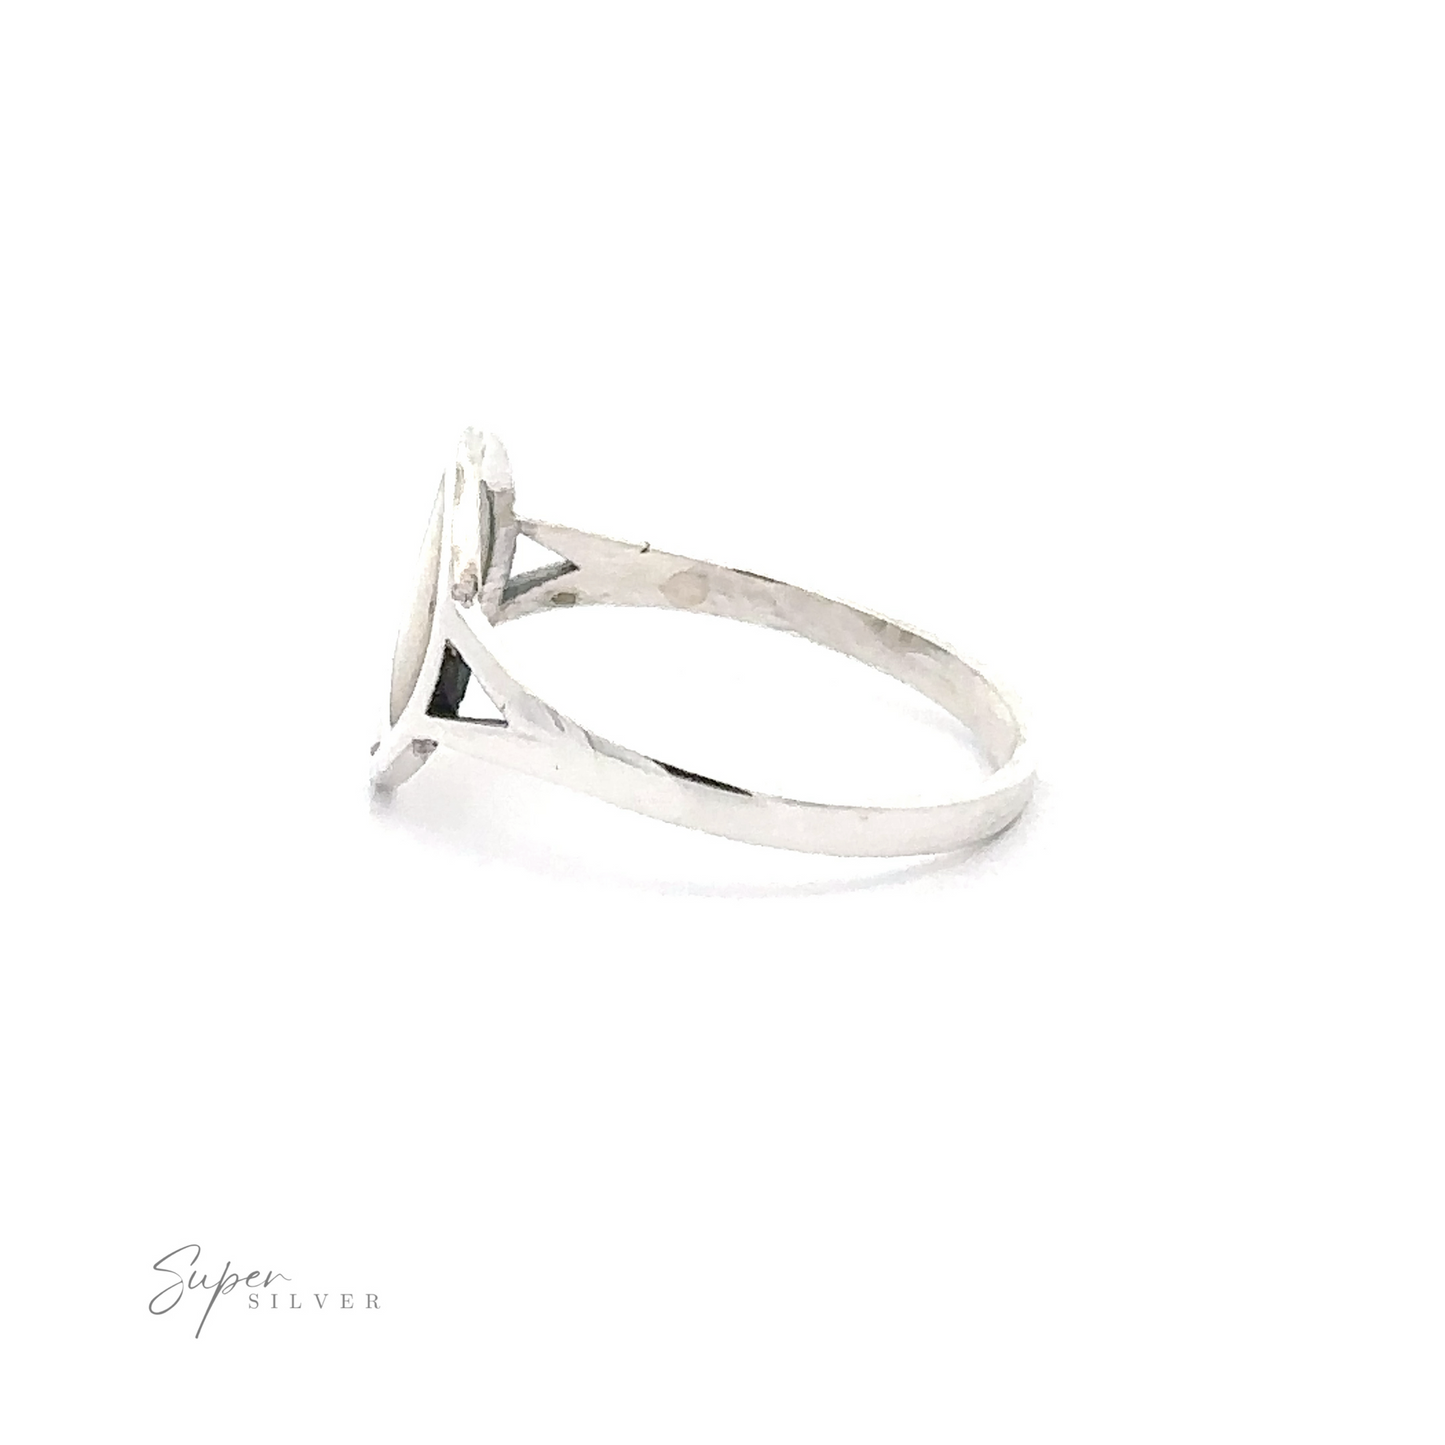 
                  
                    A thin, silver ring with a simple band and prong setting, photographed from the side against a white background. The words "Stone Inlay Peace Sign Ring" are in the bottom left corner, reminiscent of the understated elegance found in a peace sign ring.
                  
                